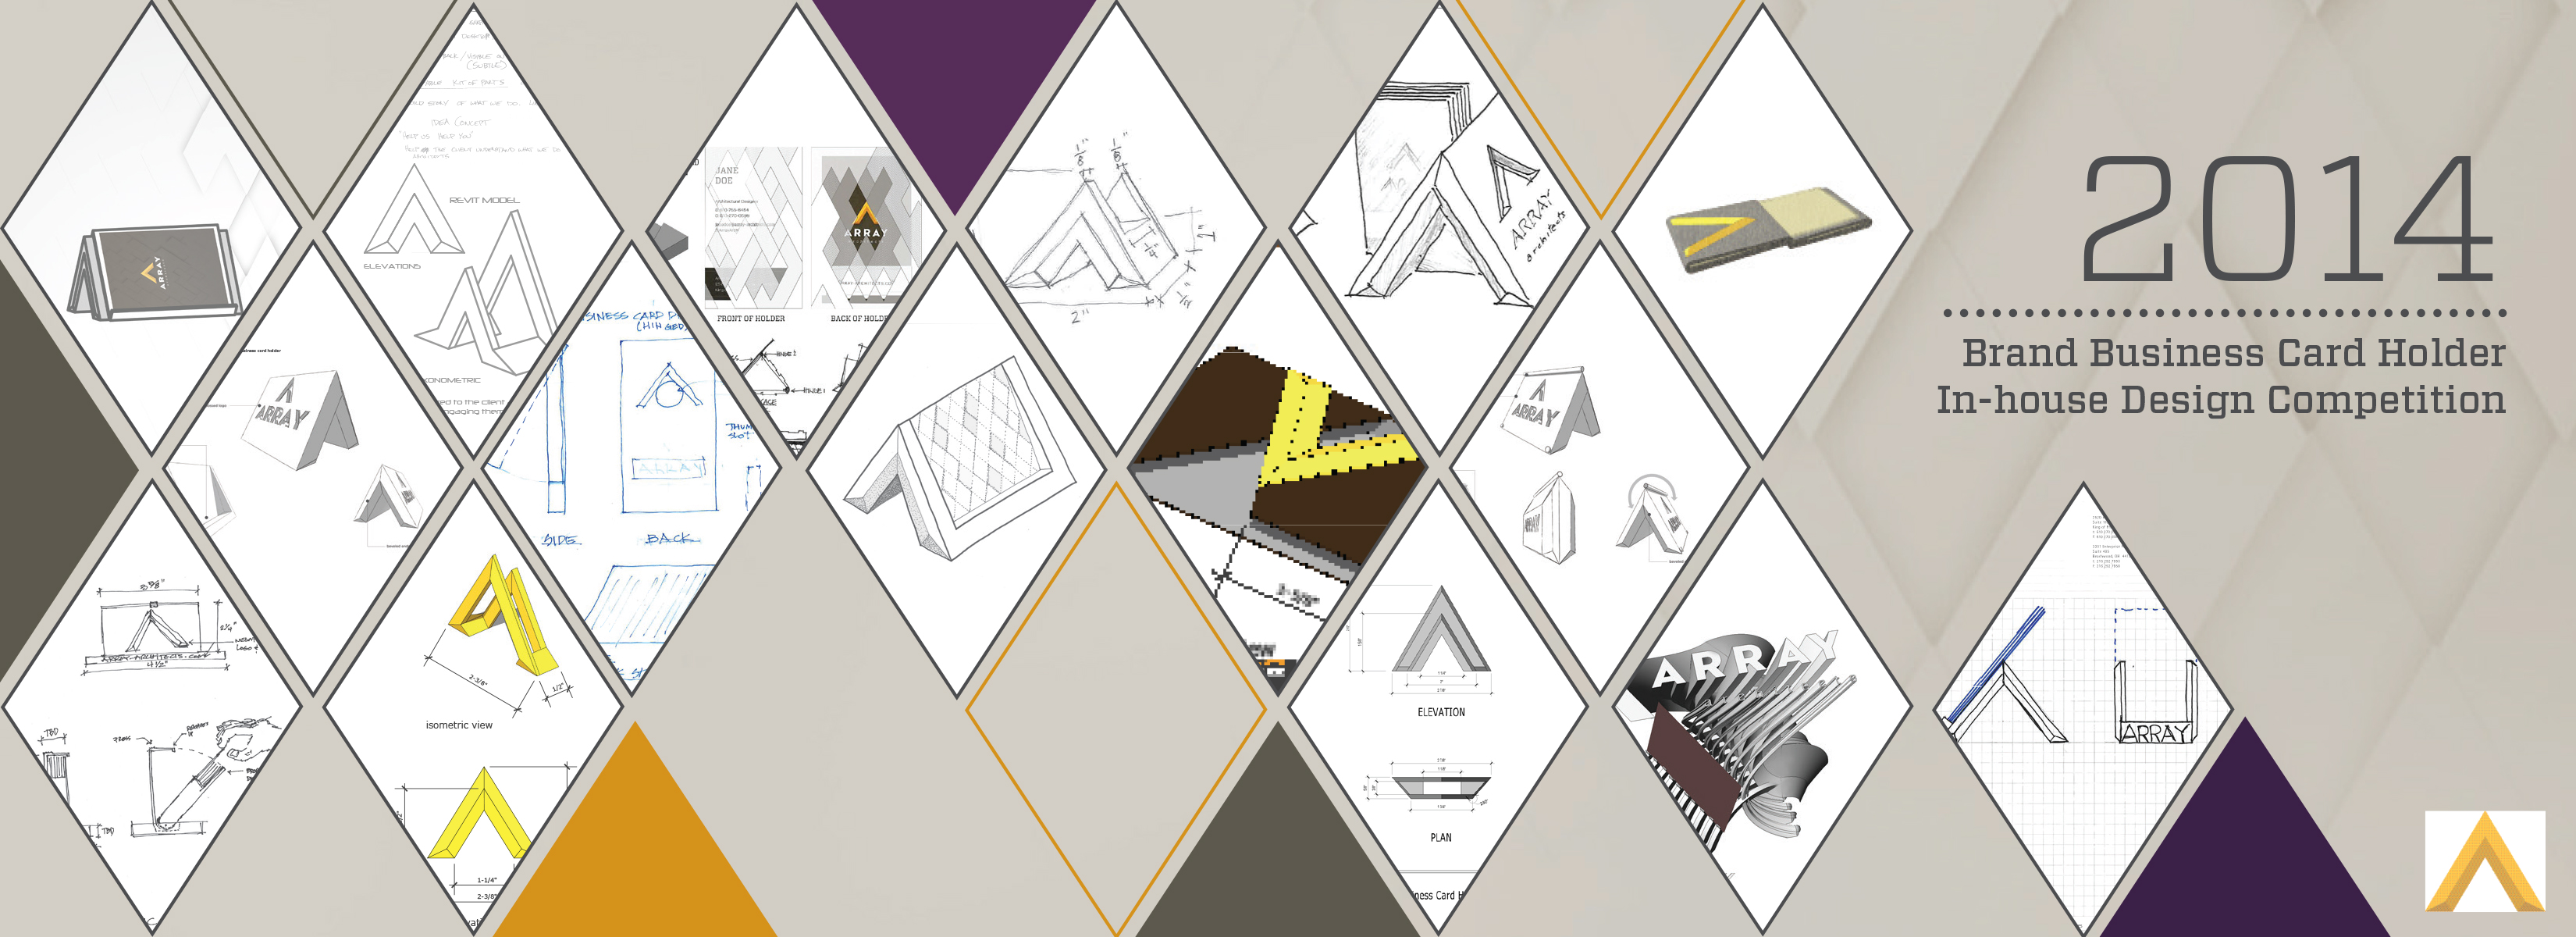 Array Architects 2014 Brand Business Holder Design Competition